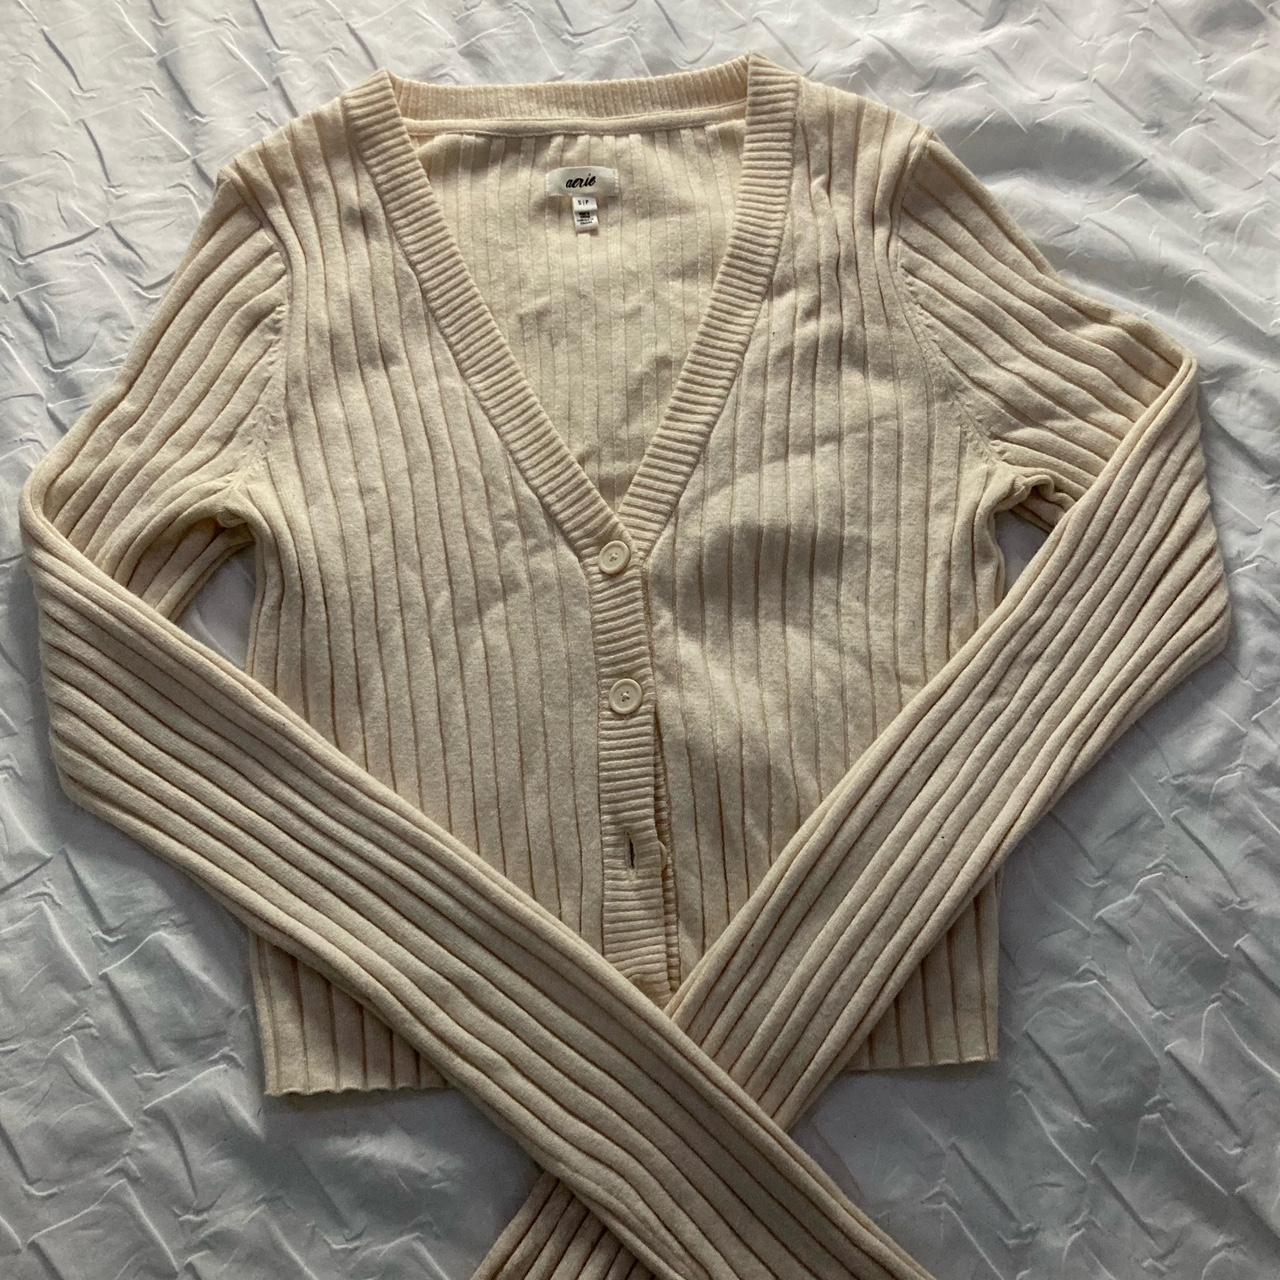 off white aerie ribbed shirt, very soft and sweater - Depop